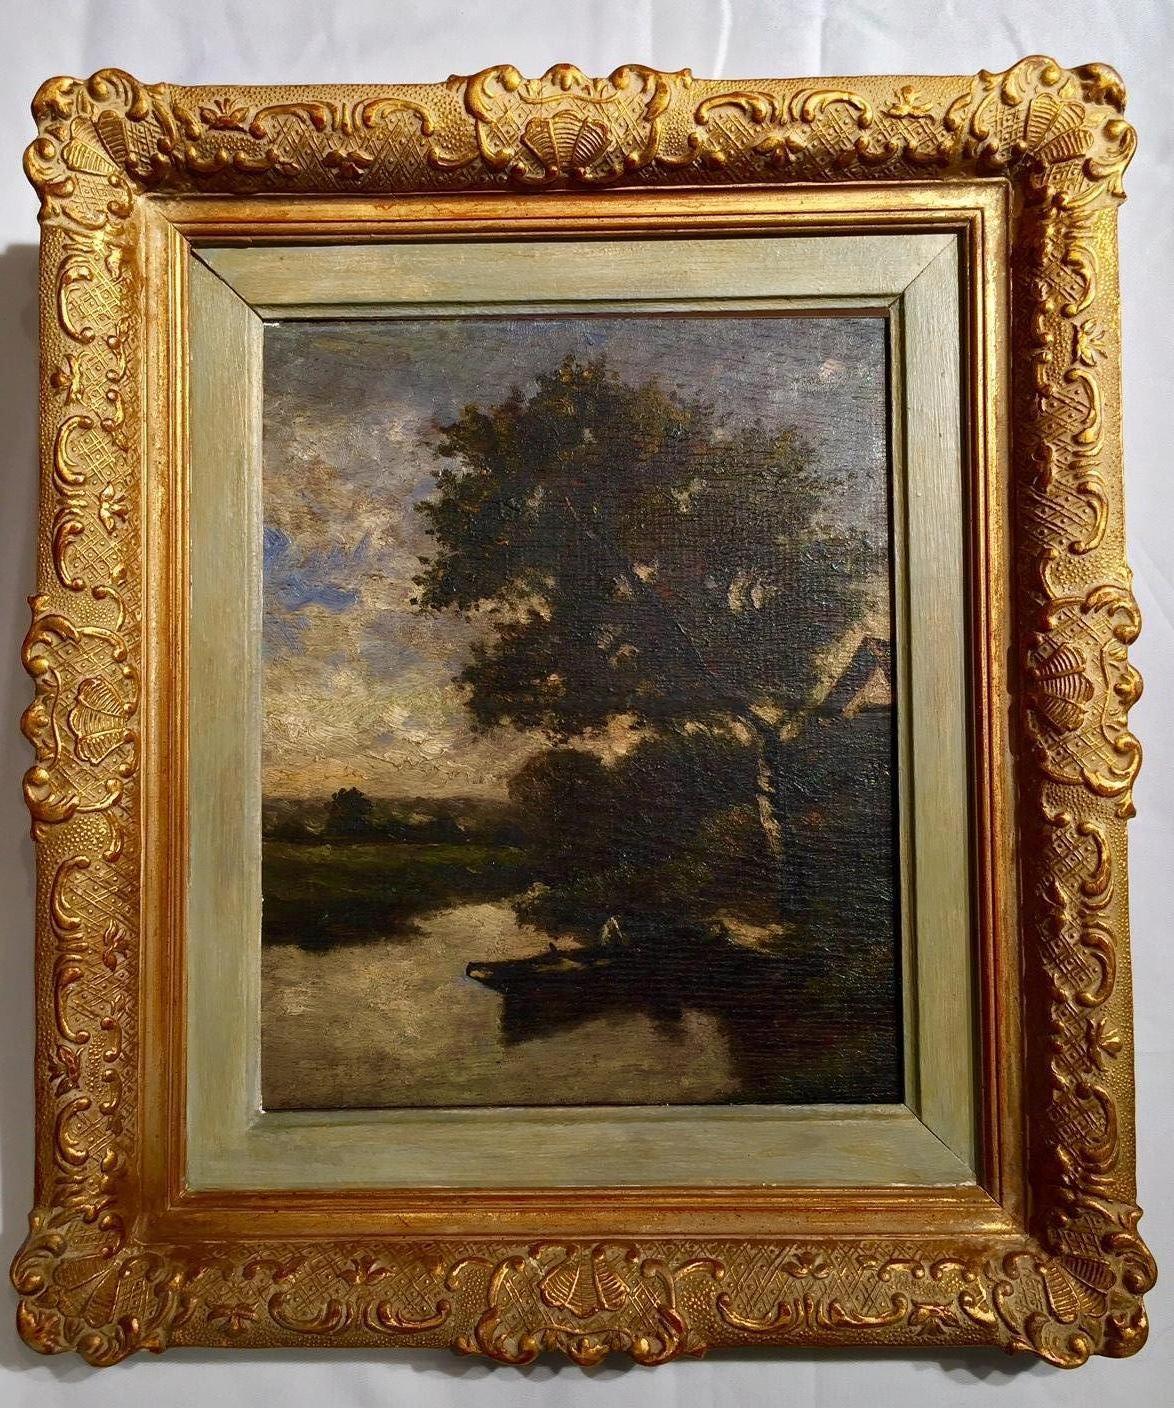 Oil painting on wood attributed to Jules Dupré (1811-1889), a French artist famous for his dramatic paintings of forests around Paris and one of the leaders of the Barbizon School of landscape painters. Deep, rich colors, moving rendition of the